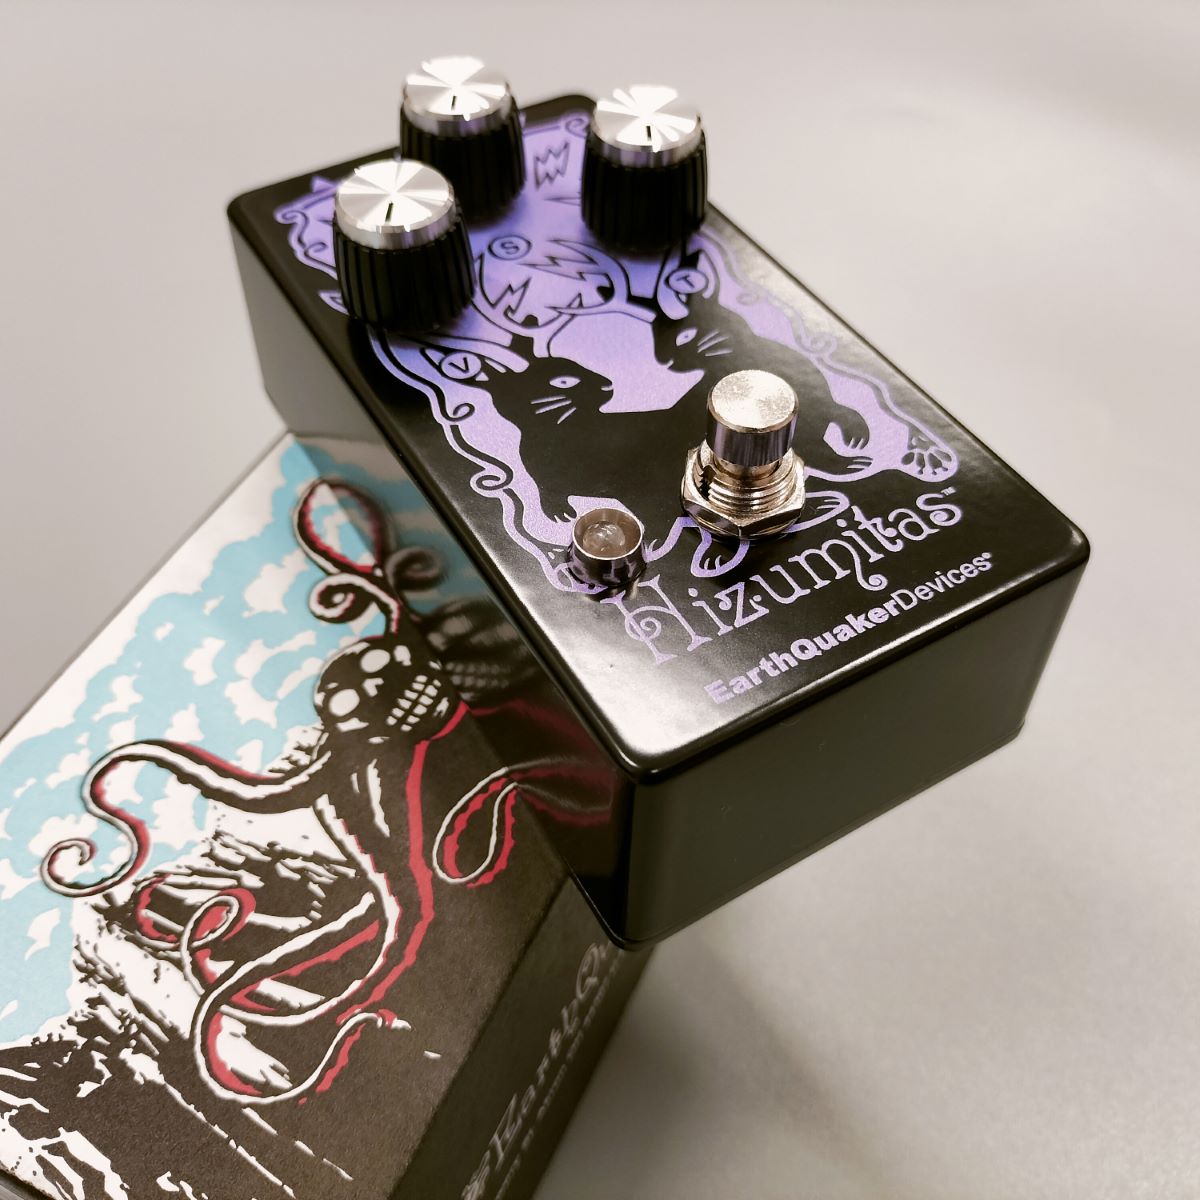 EarthQuaker Devices Hizumitas Gloss Black コンパクトエフェクター